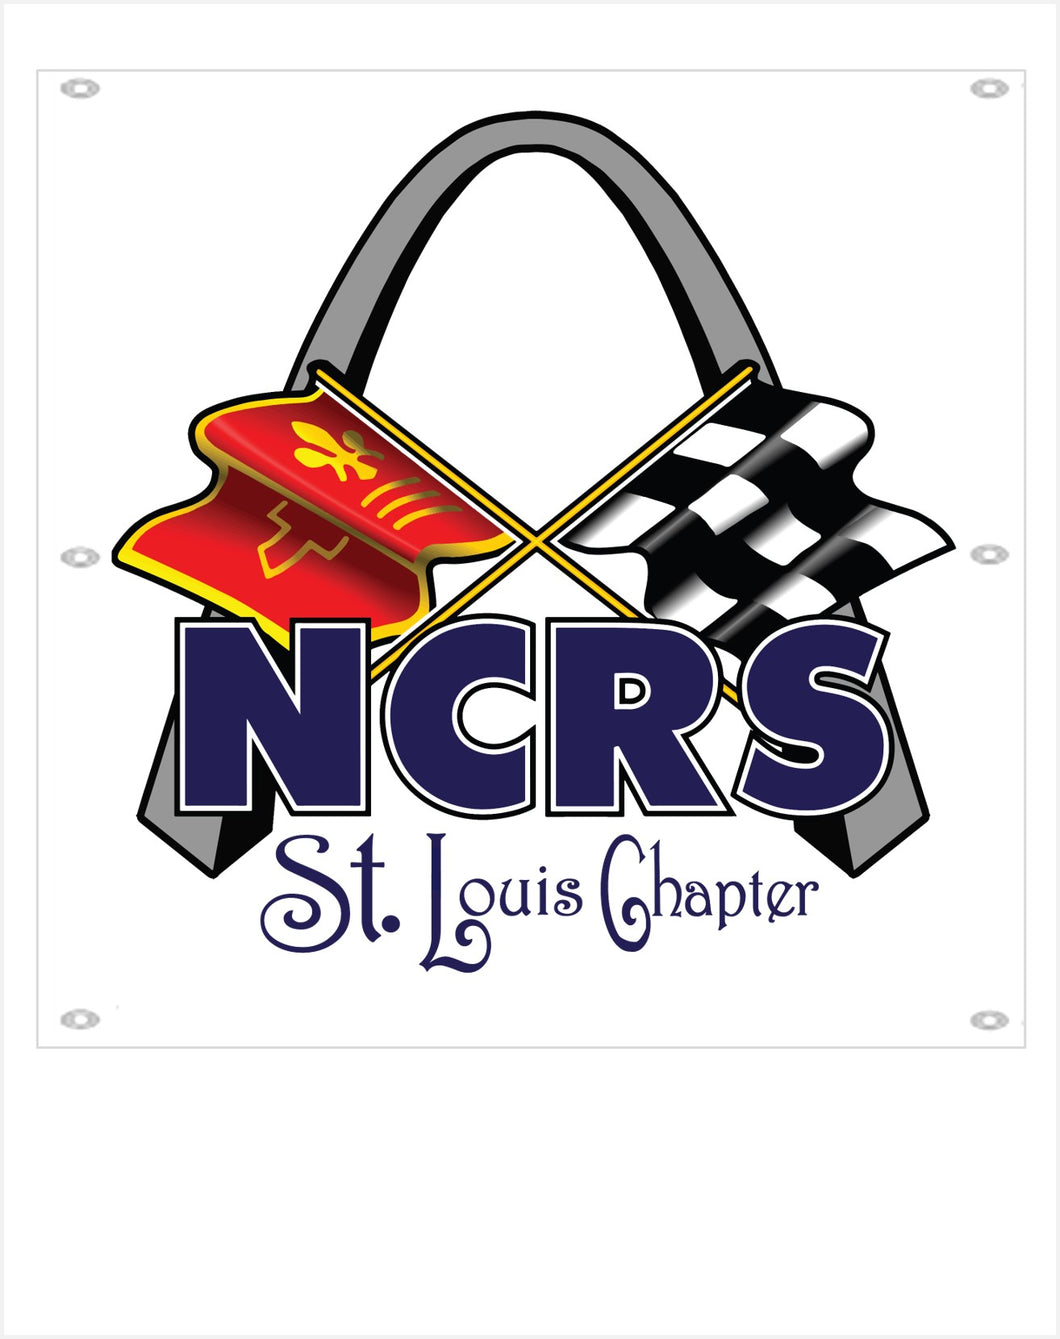 NCRS ST LOUIS CHAPTER Garage Banner